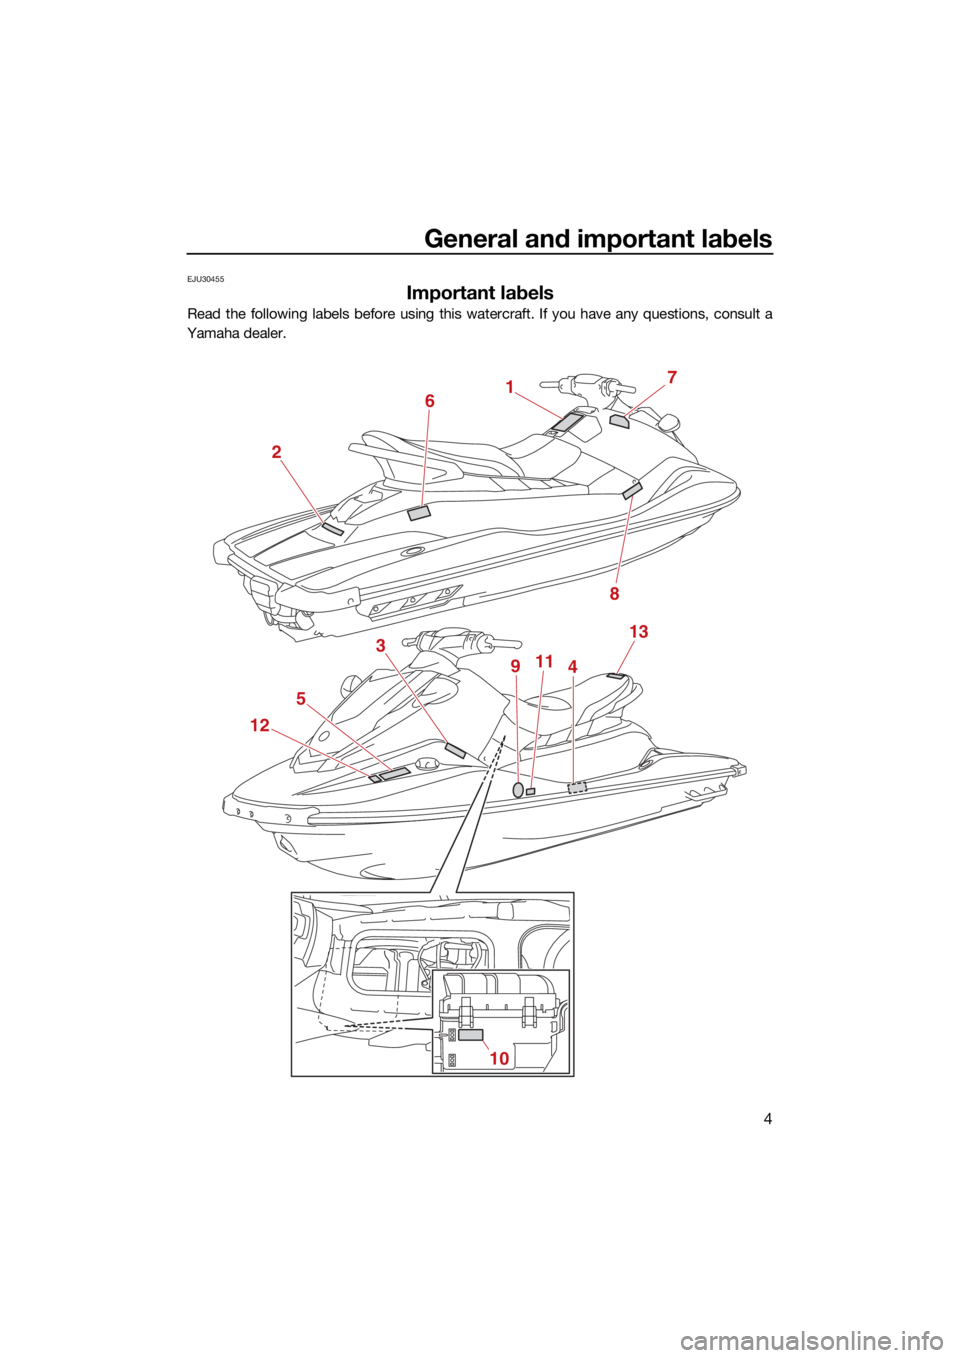 YAMAHA EX DELUXE 2022 User Guide General and important labels
4
EJU30455
Important labels
Read the following labels before using this watercraft. If you have any questions, consult a
Yamaha dealer.
17
8
2
6
5
12 3
9
114
10
13
UF3Y75E